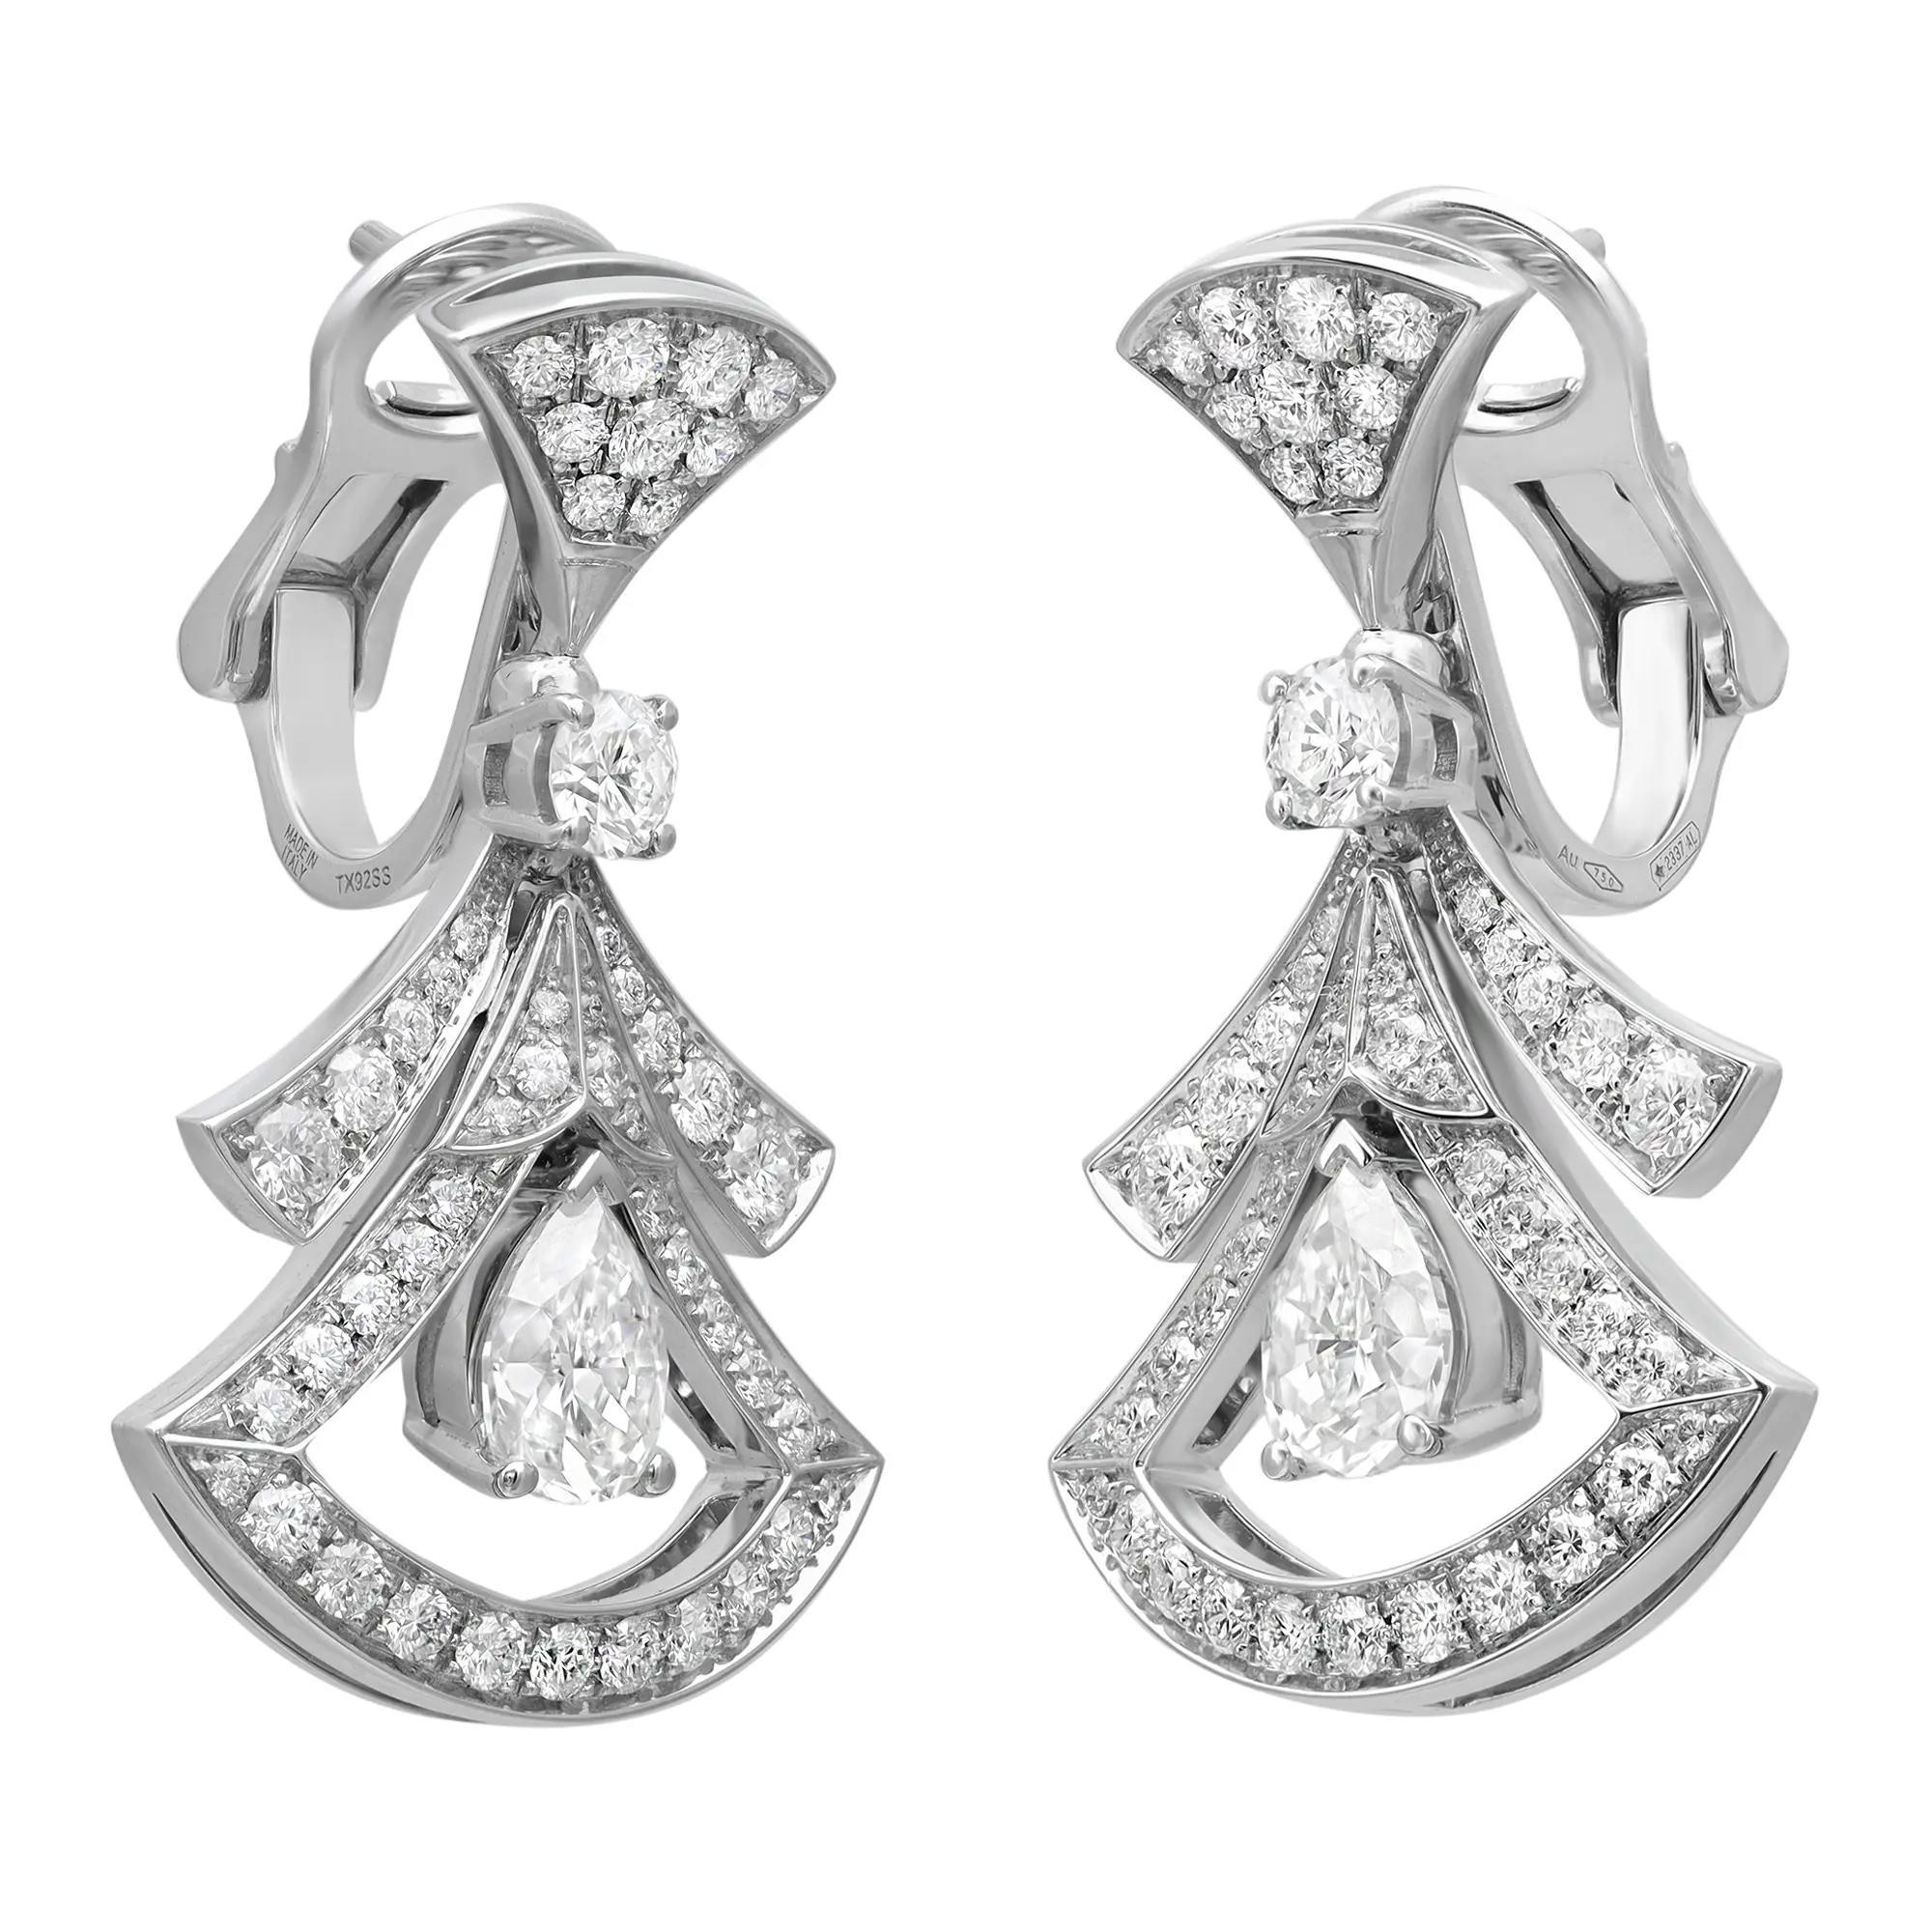 Quintessentially feminine and glamorous, these earrings capture the essence of Italian beauty. Crafted in lustrous 18K white gold. These earrings feature fan shaped motifs studded with pave set round cut diamonds weighing 1.18 carats with two prong